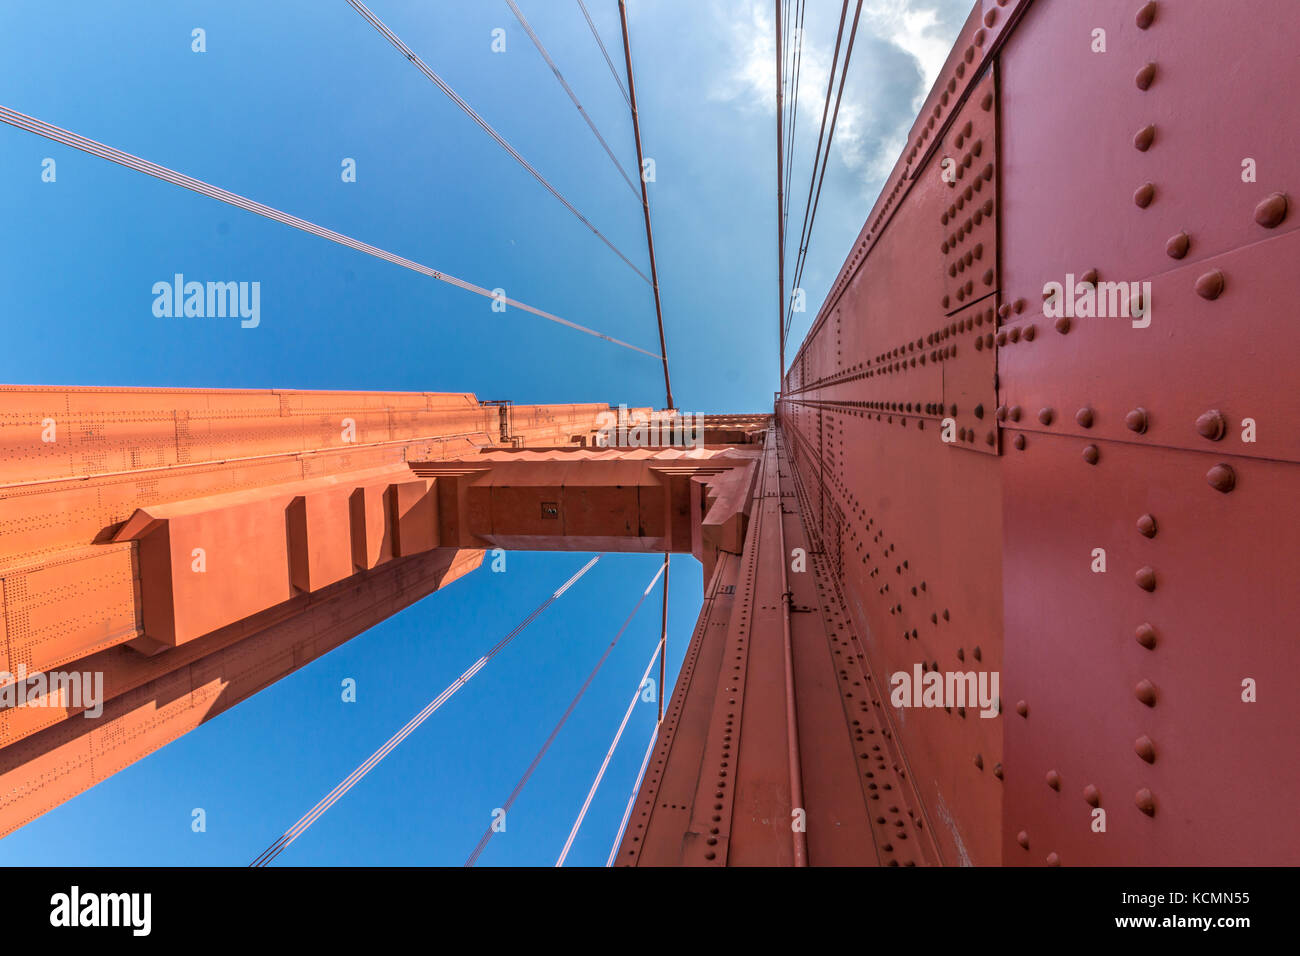 View from below of the Golden Gate Bridge structure. Stock Photo